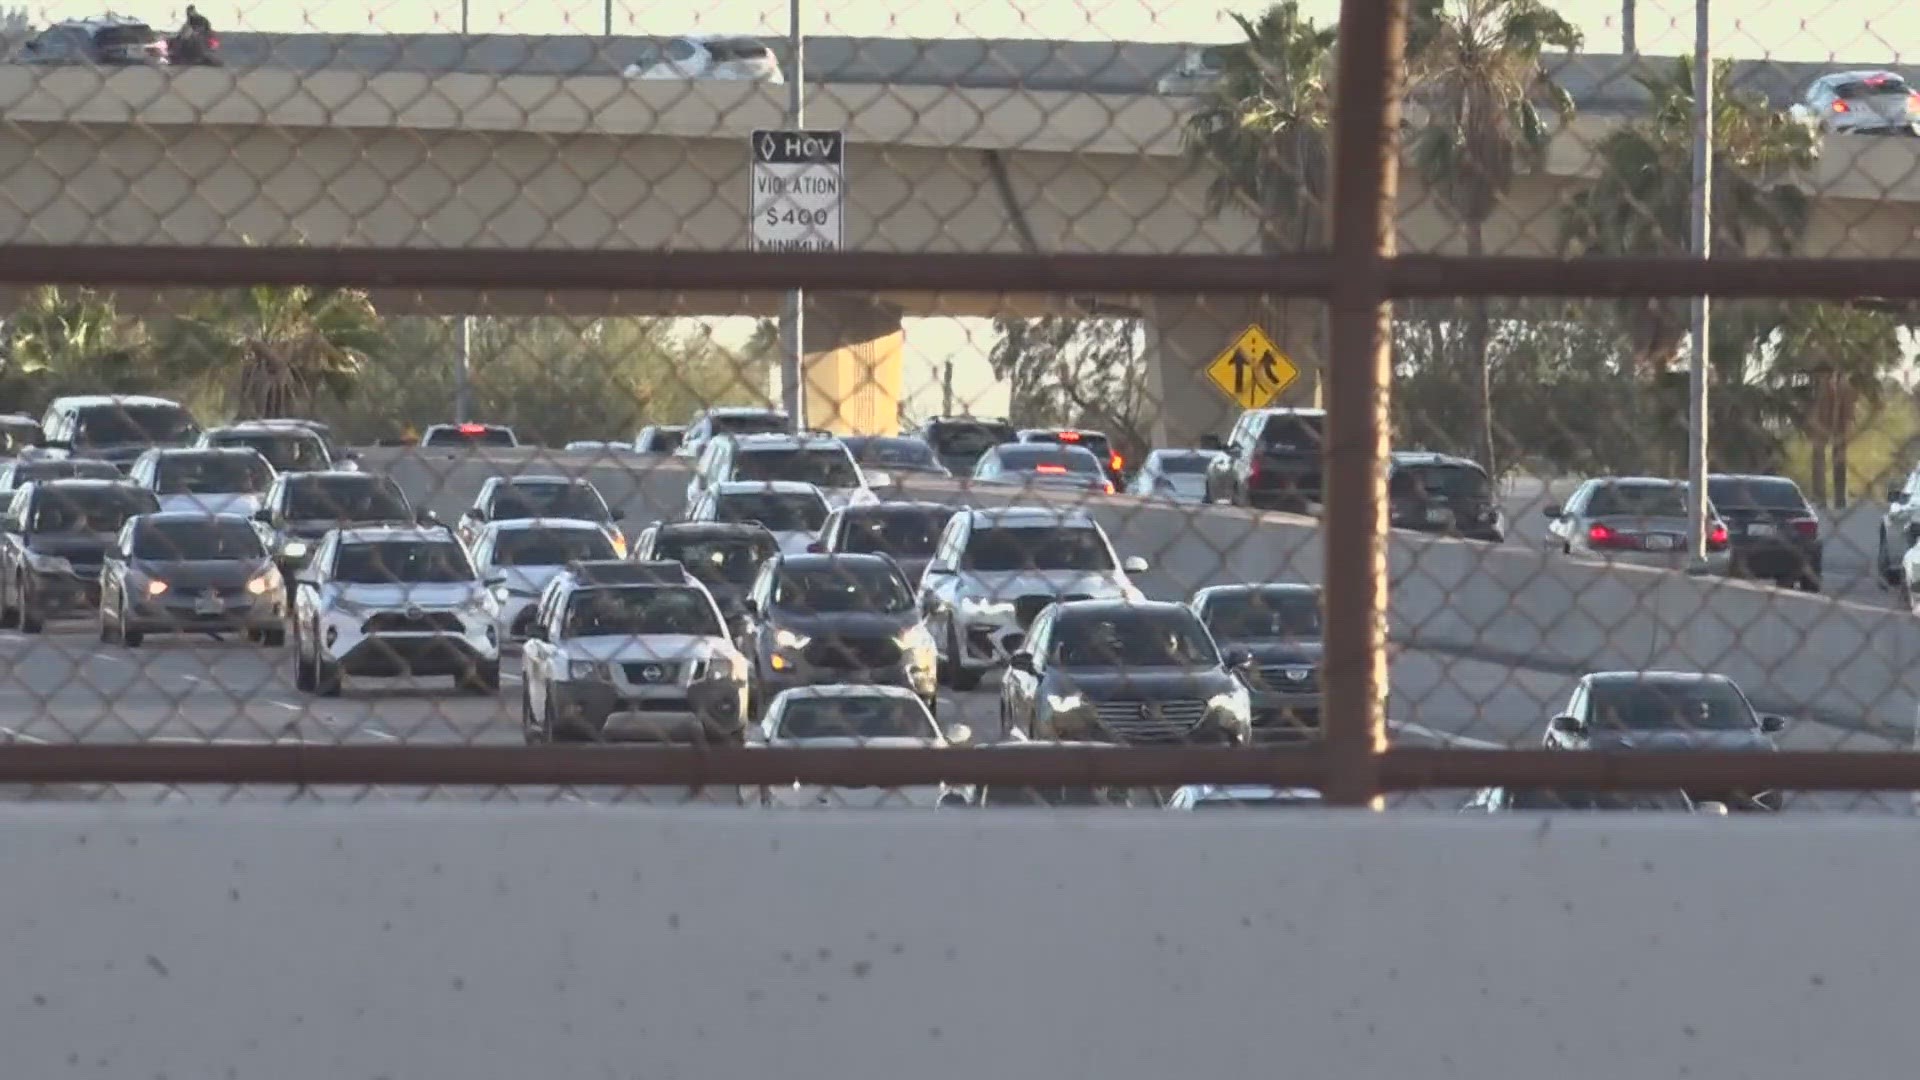 The Maricopa Association of Governments is conducting a survey for drivers to share experience driving on Interstate 10 near the Mini Stack.